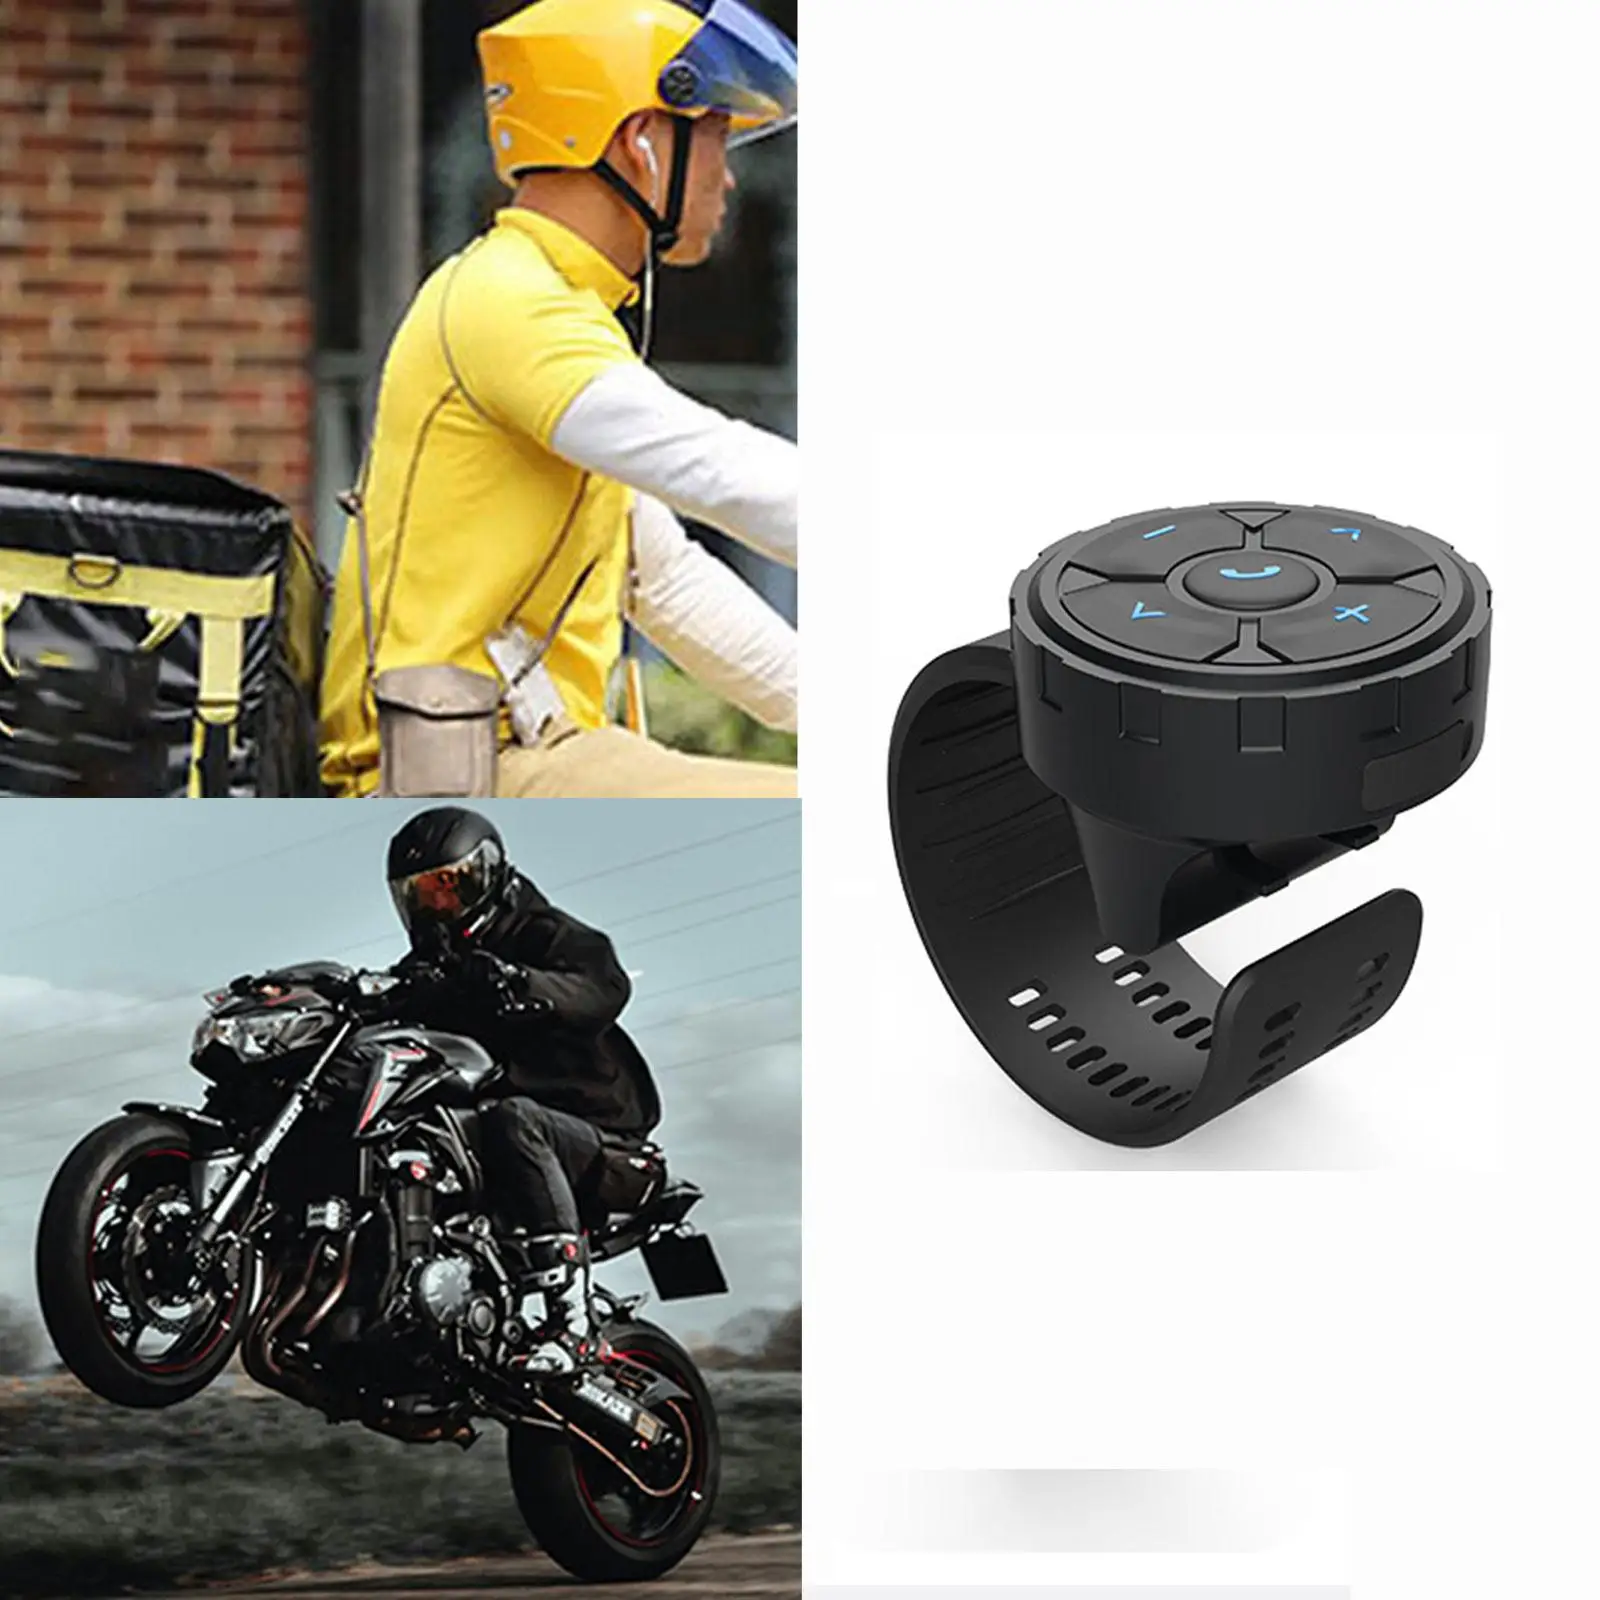 Steering Wheel Remote Control Styling Player for Bike Motorcycle Handlebar